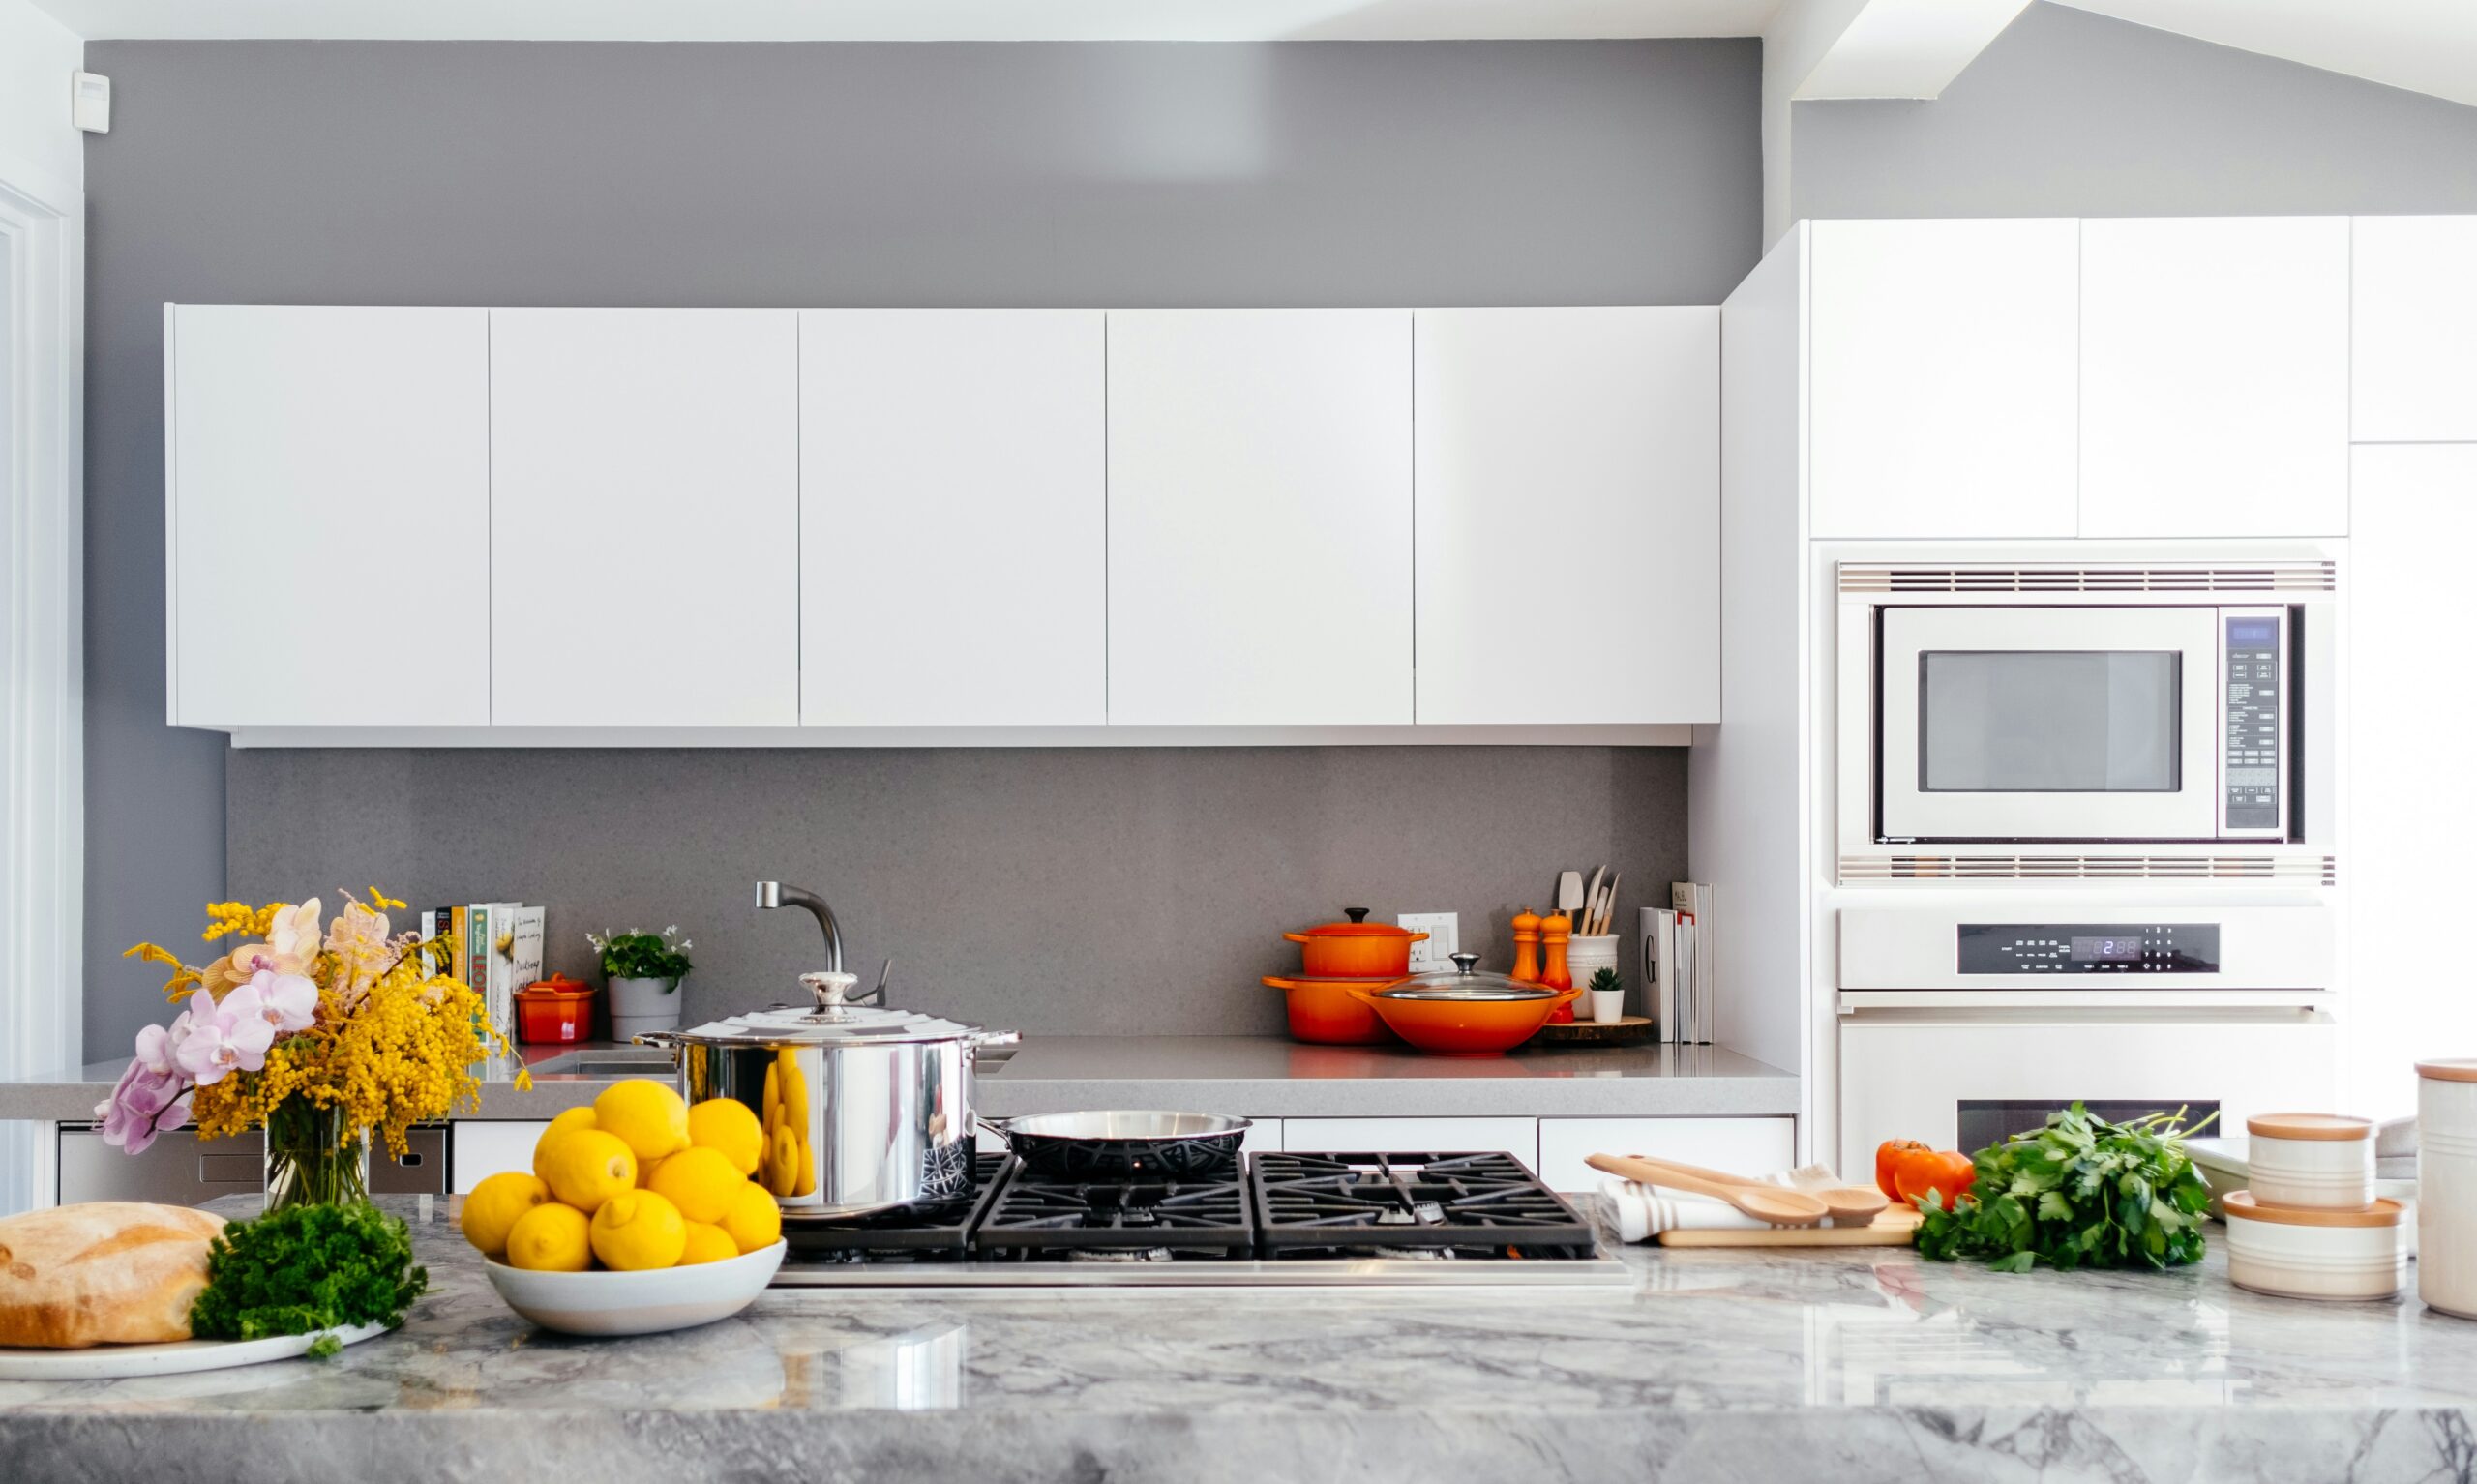 Seven Ideas for Making a Small Kitchen Look Bigger